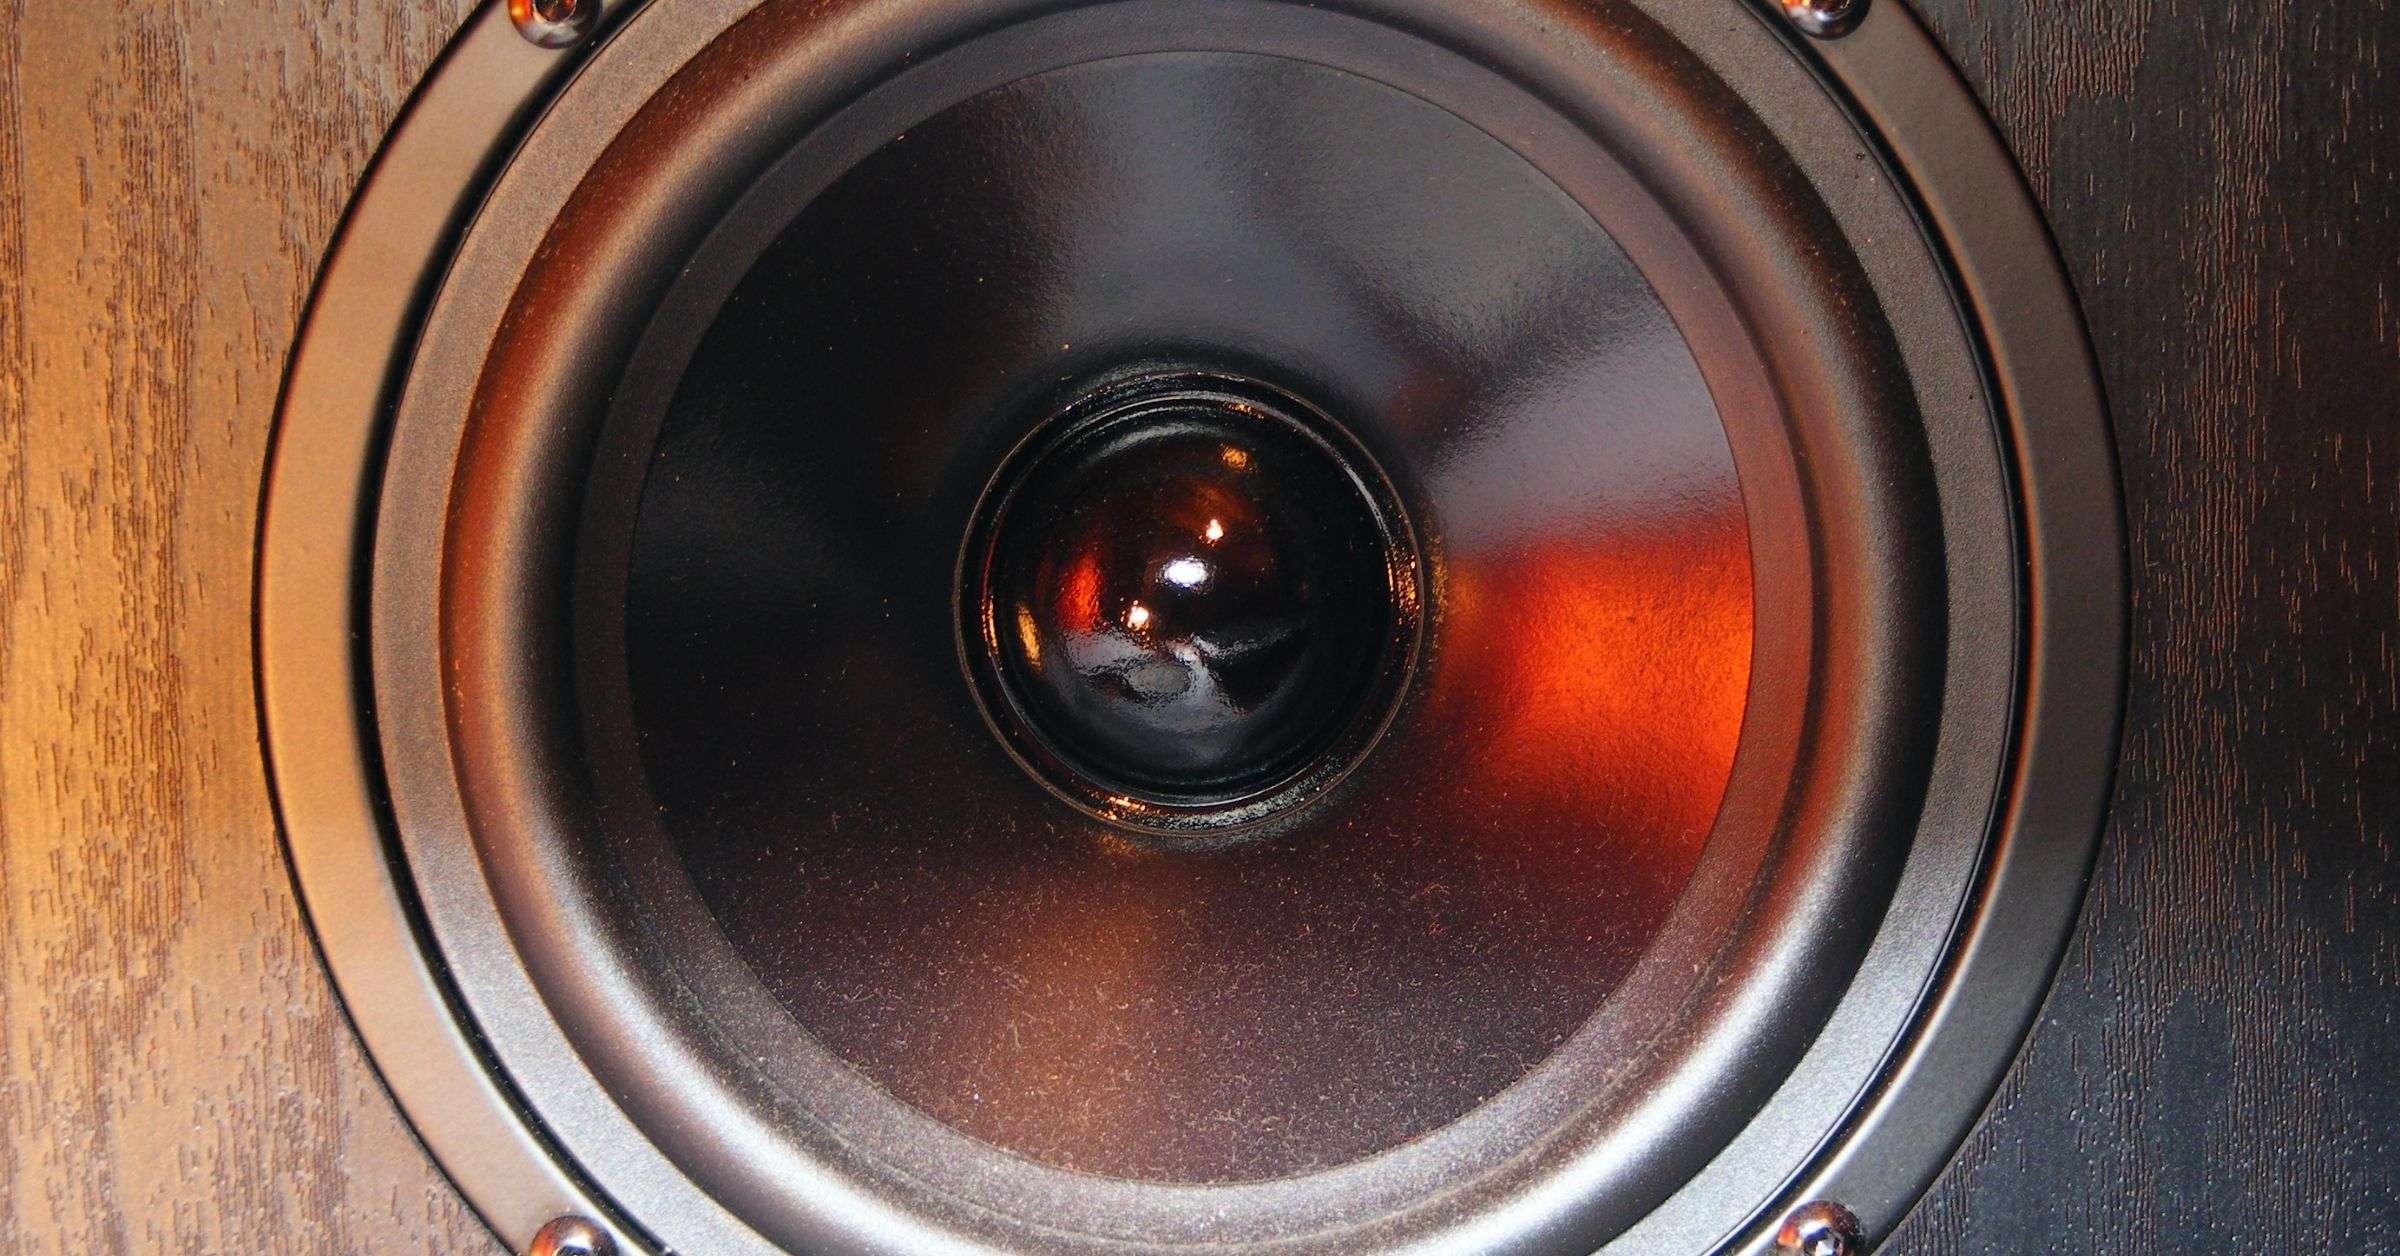 Image of a powered speaker